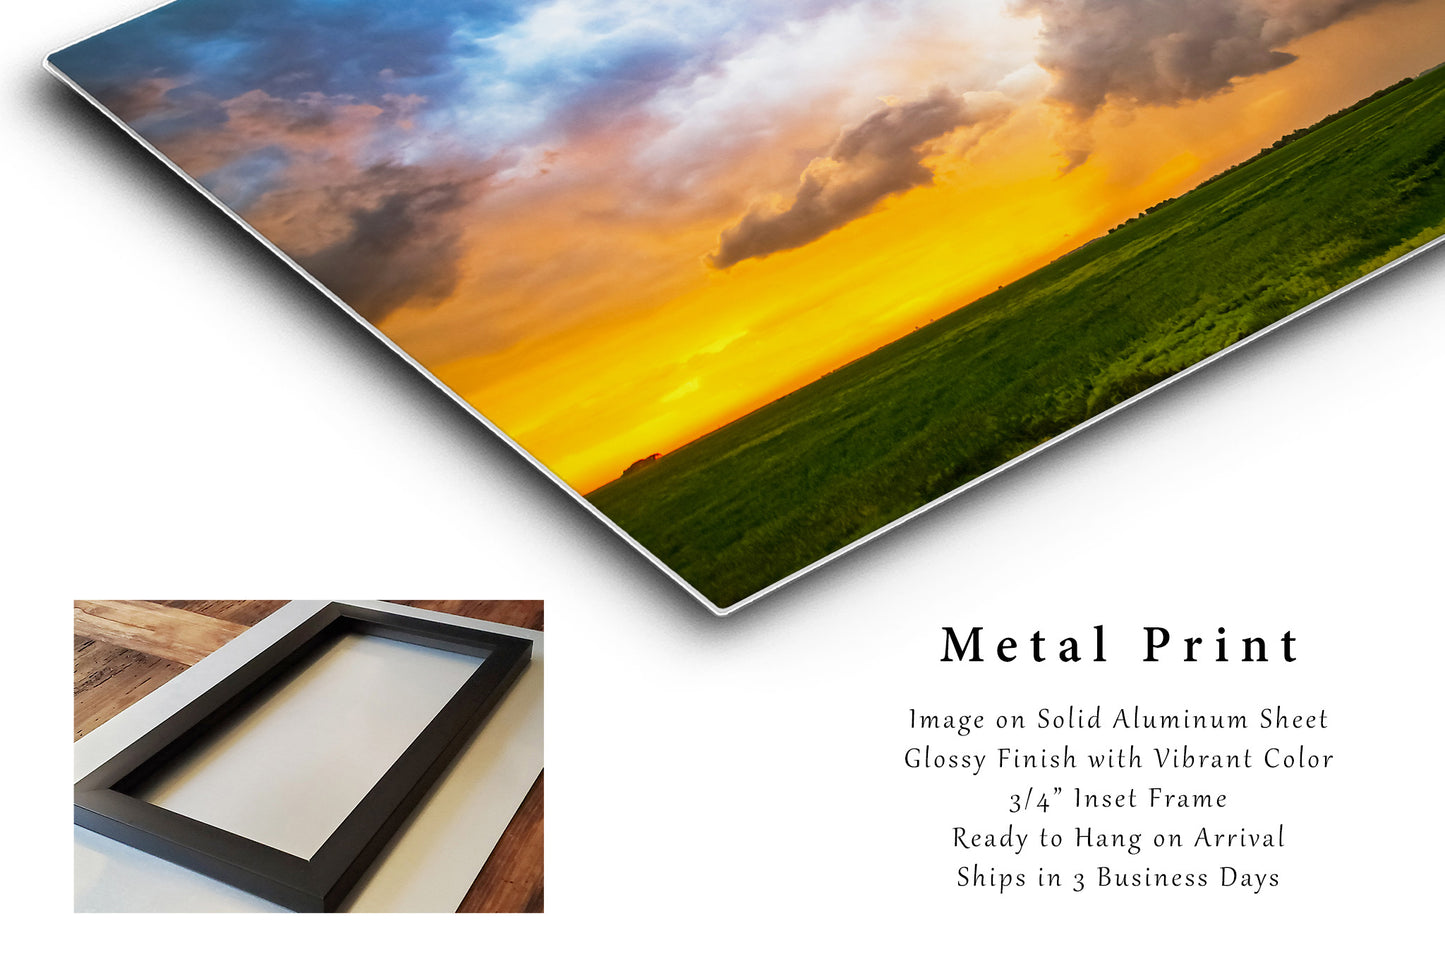 Great Plains Metal Print - Picture of Colorful Storm Clouds at Sunset on Spring Evening in Kansas on Aluminum Metal - Thunderstorm Wall Art